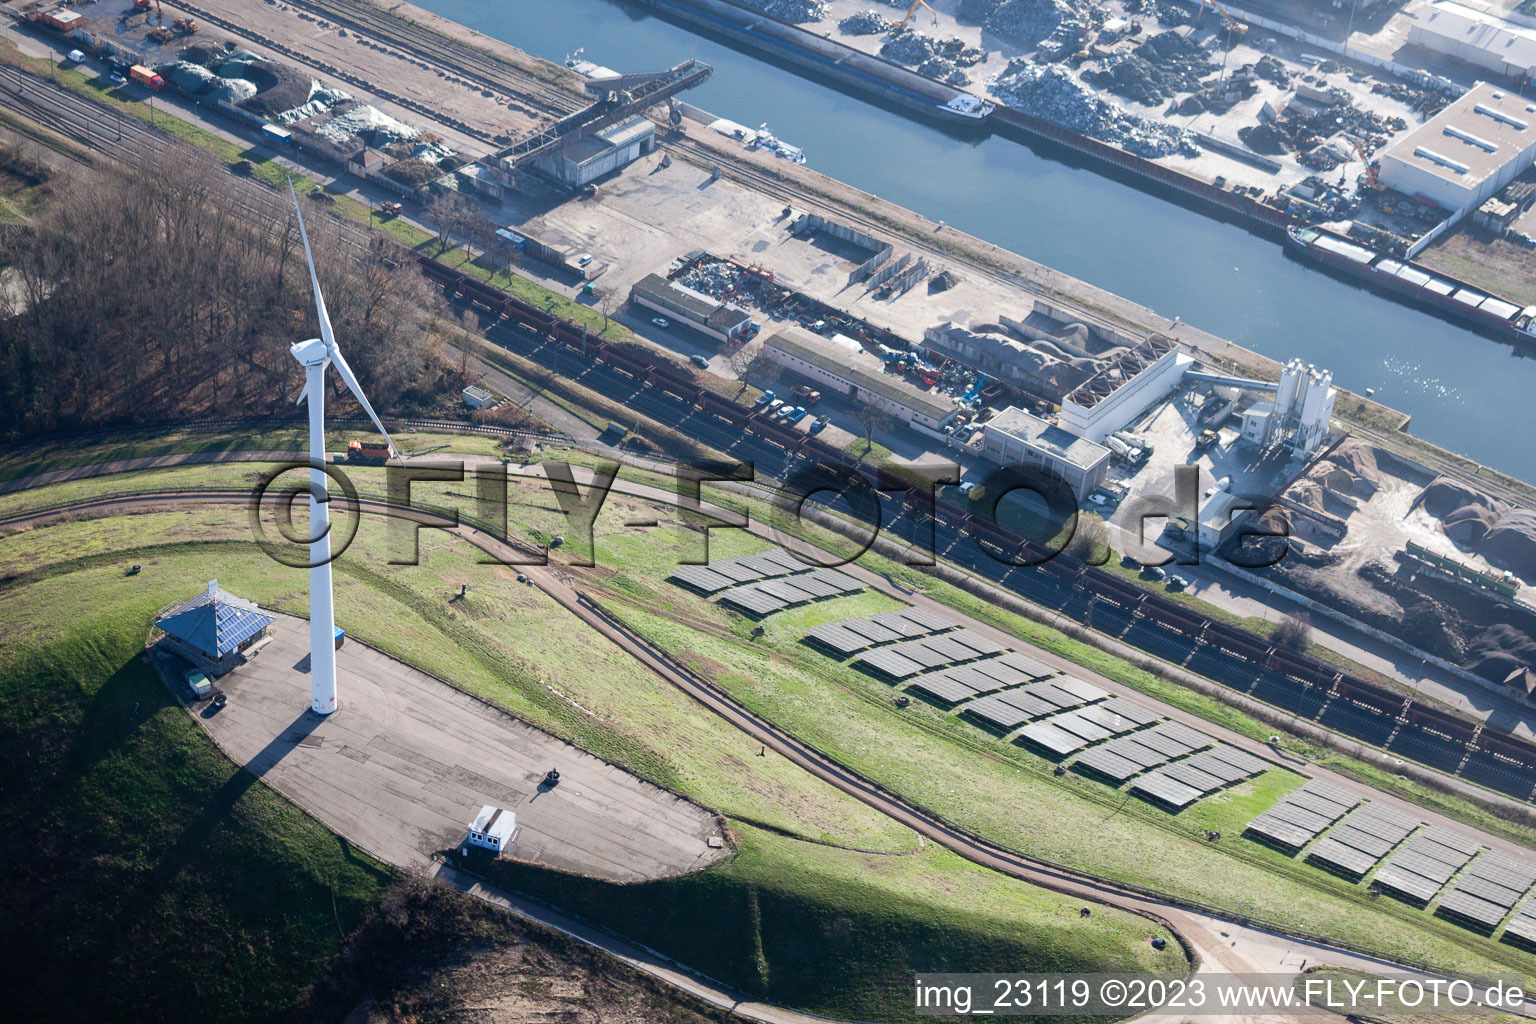 District Rheinhafen in Karlsruhe in the state Baden-Wuerttemberg, Germany from a drone